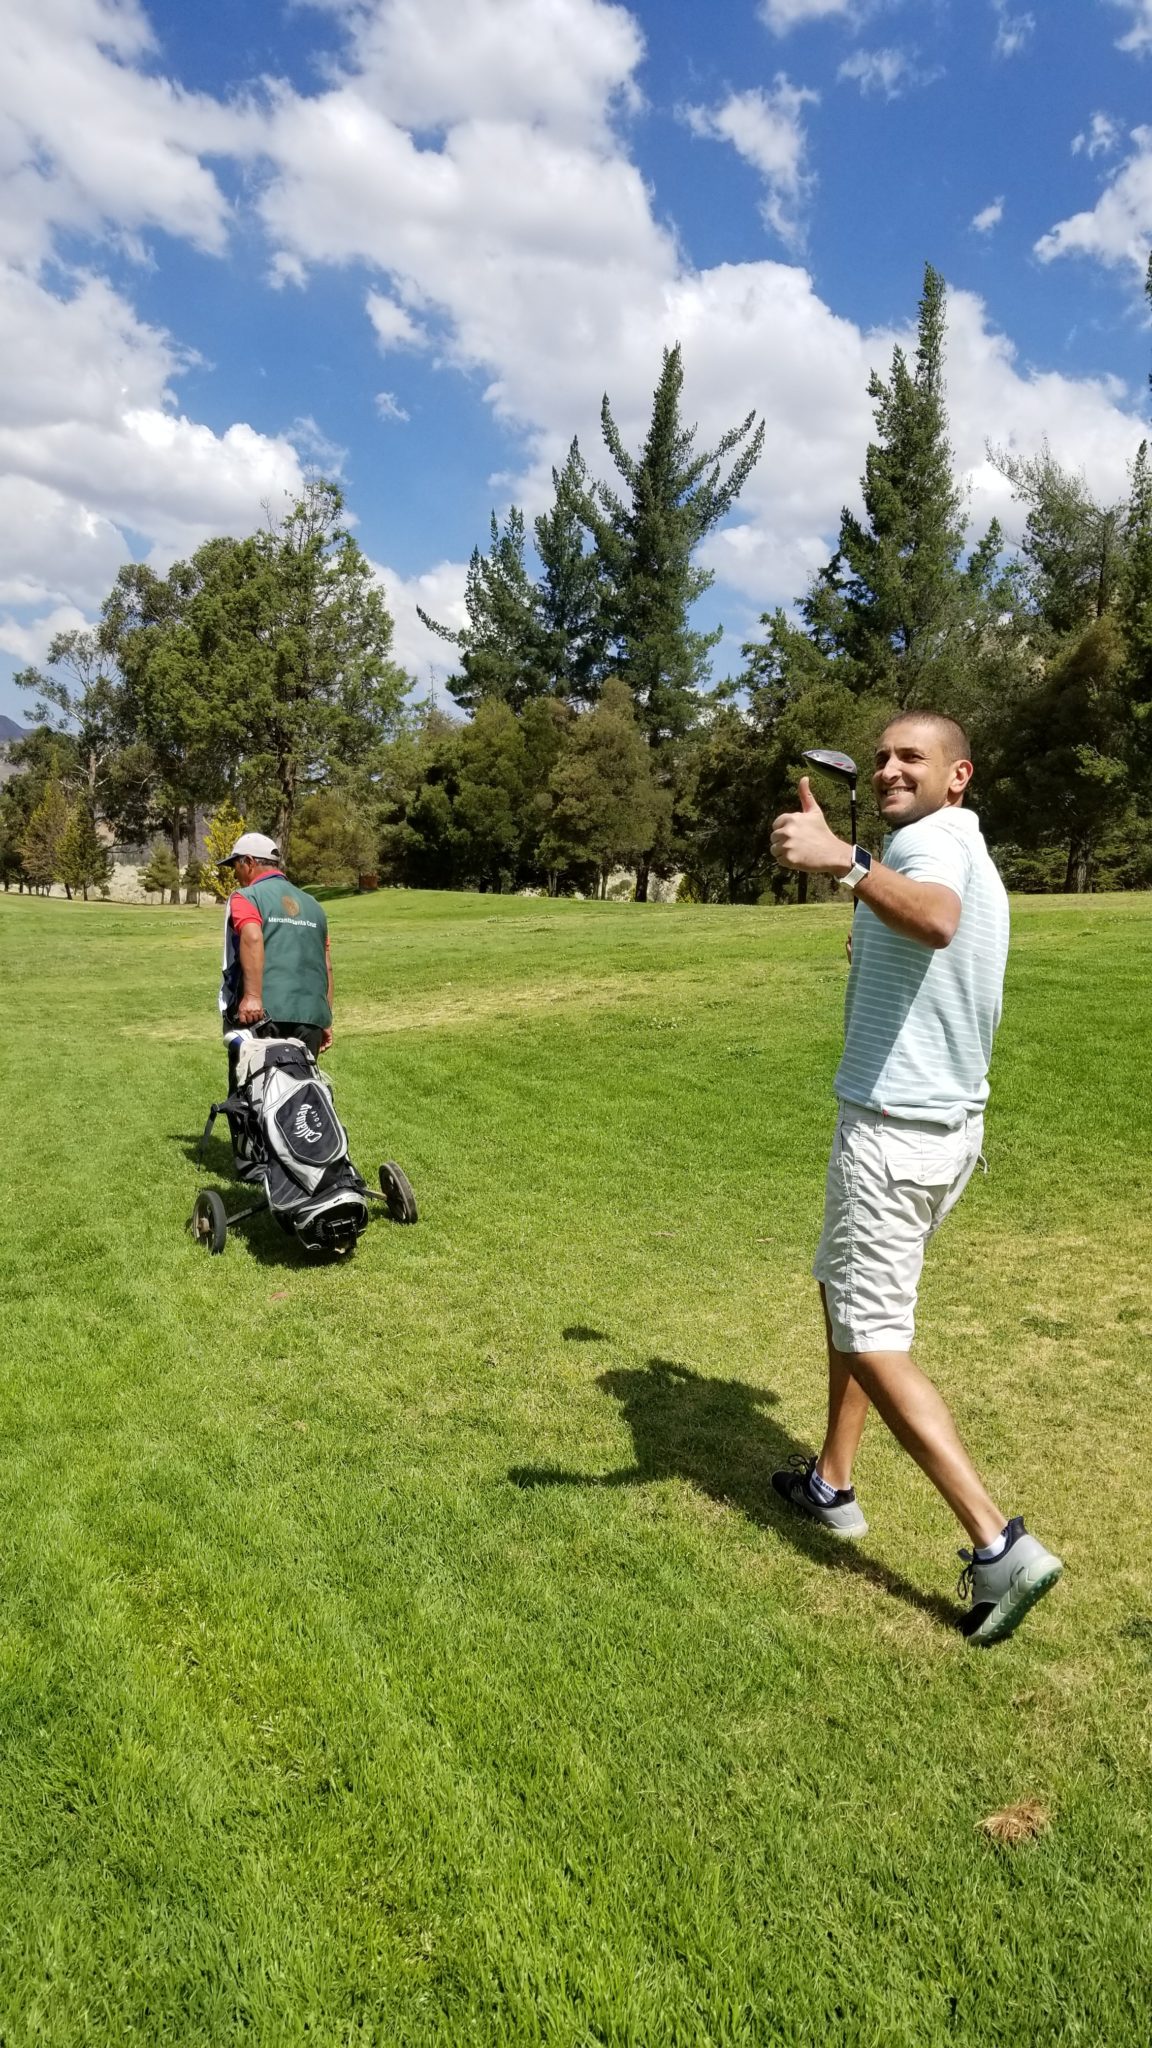 a man walking on a golf course with a golf bag and a man in a green shirt